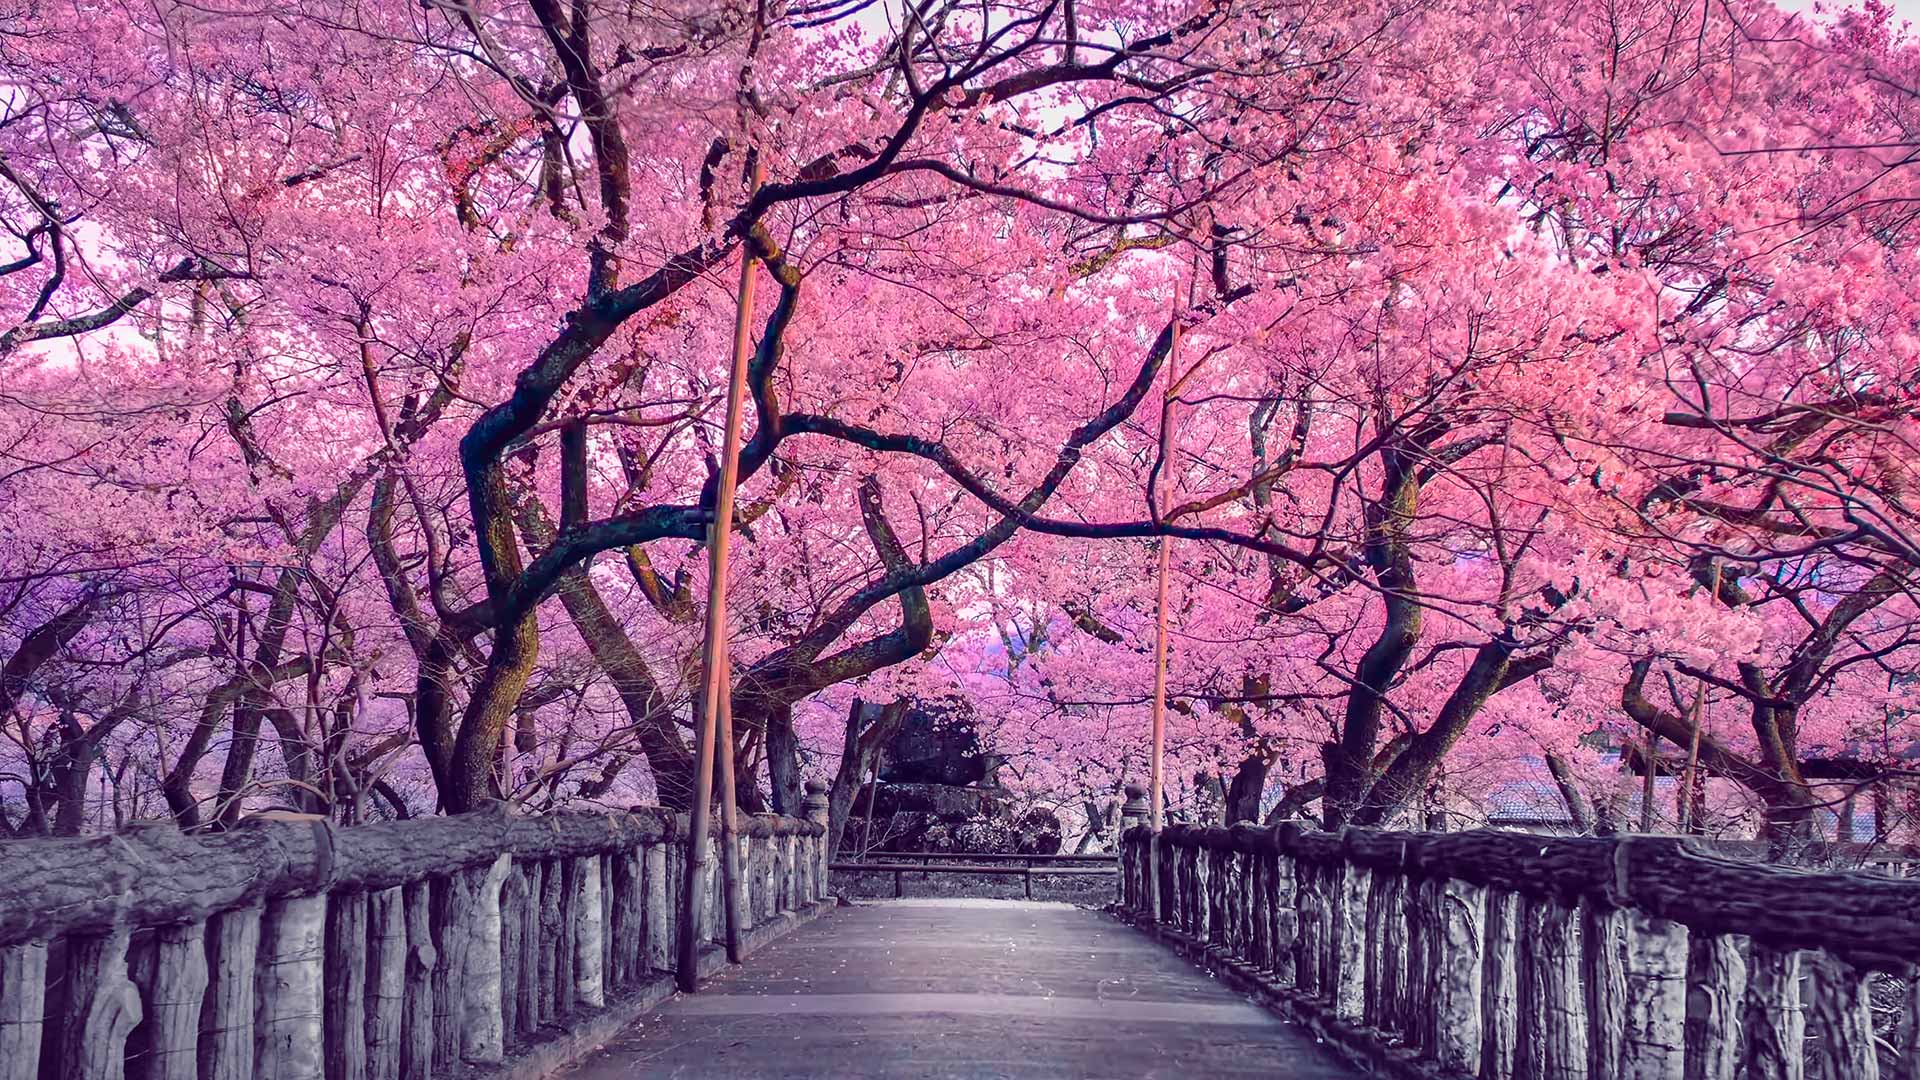 Beautiful pink cherry trees in blossom surrounding a wooden bridge